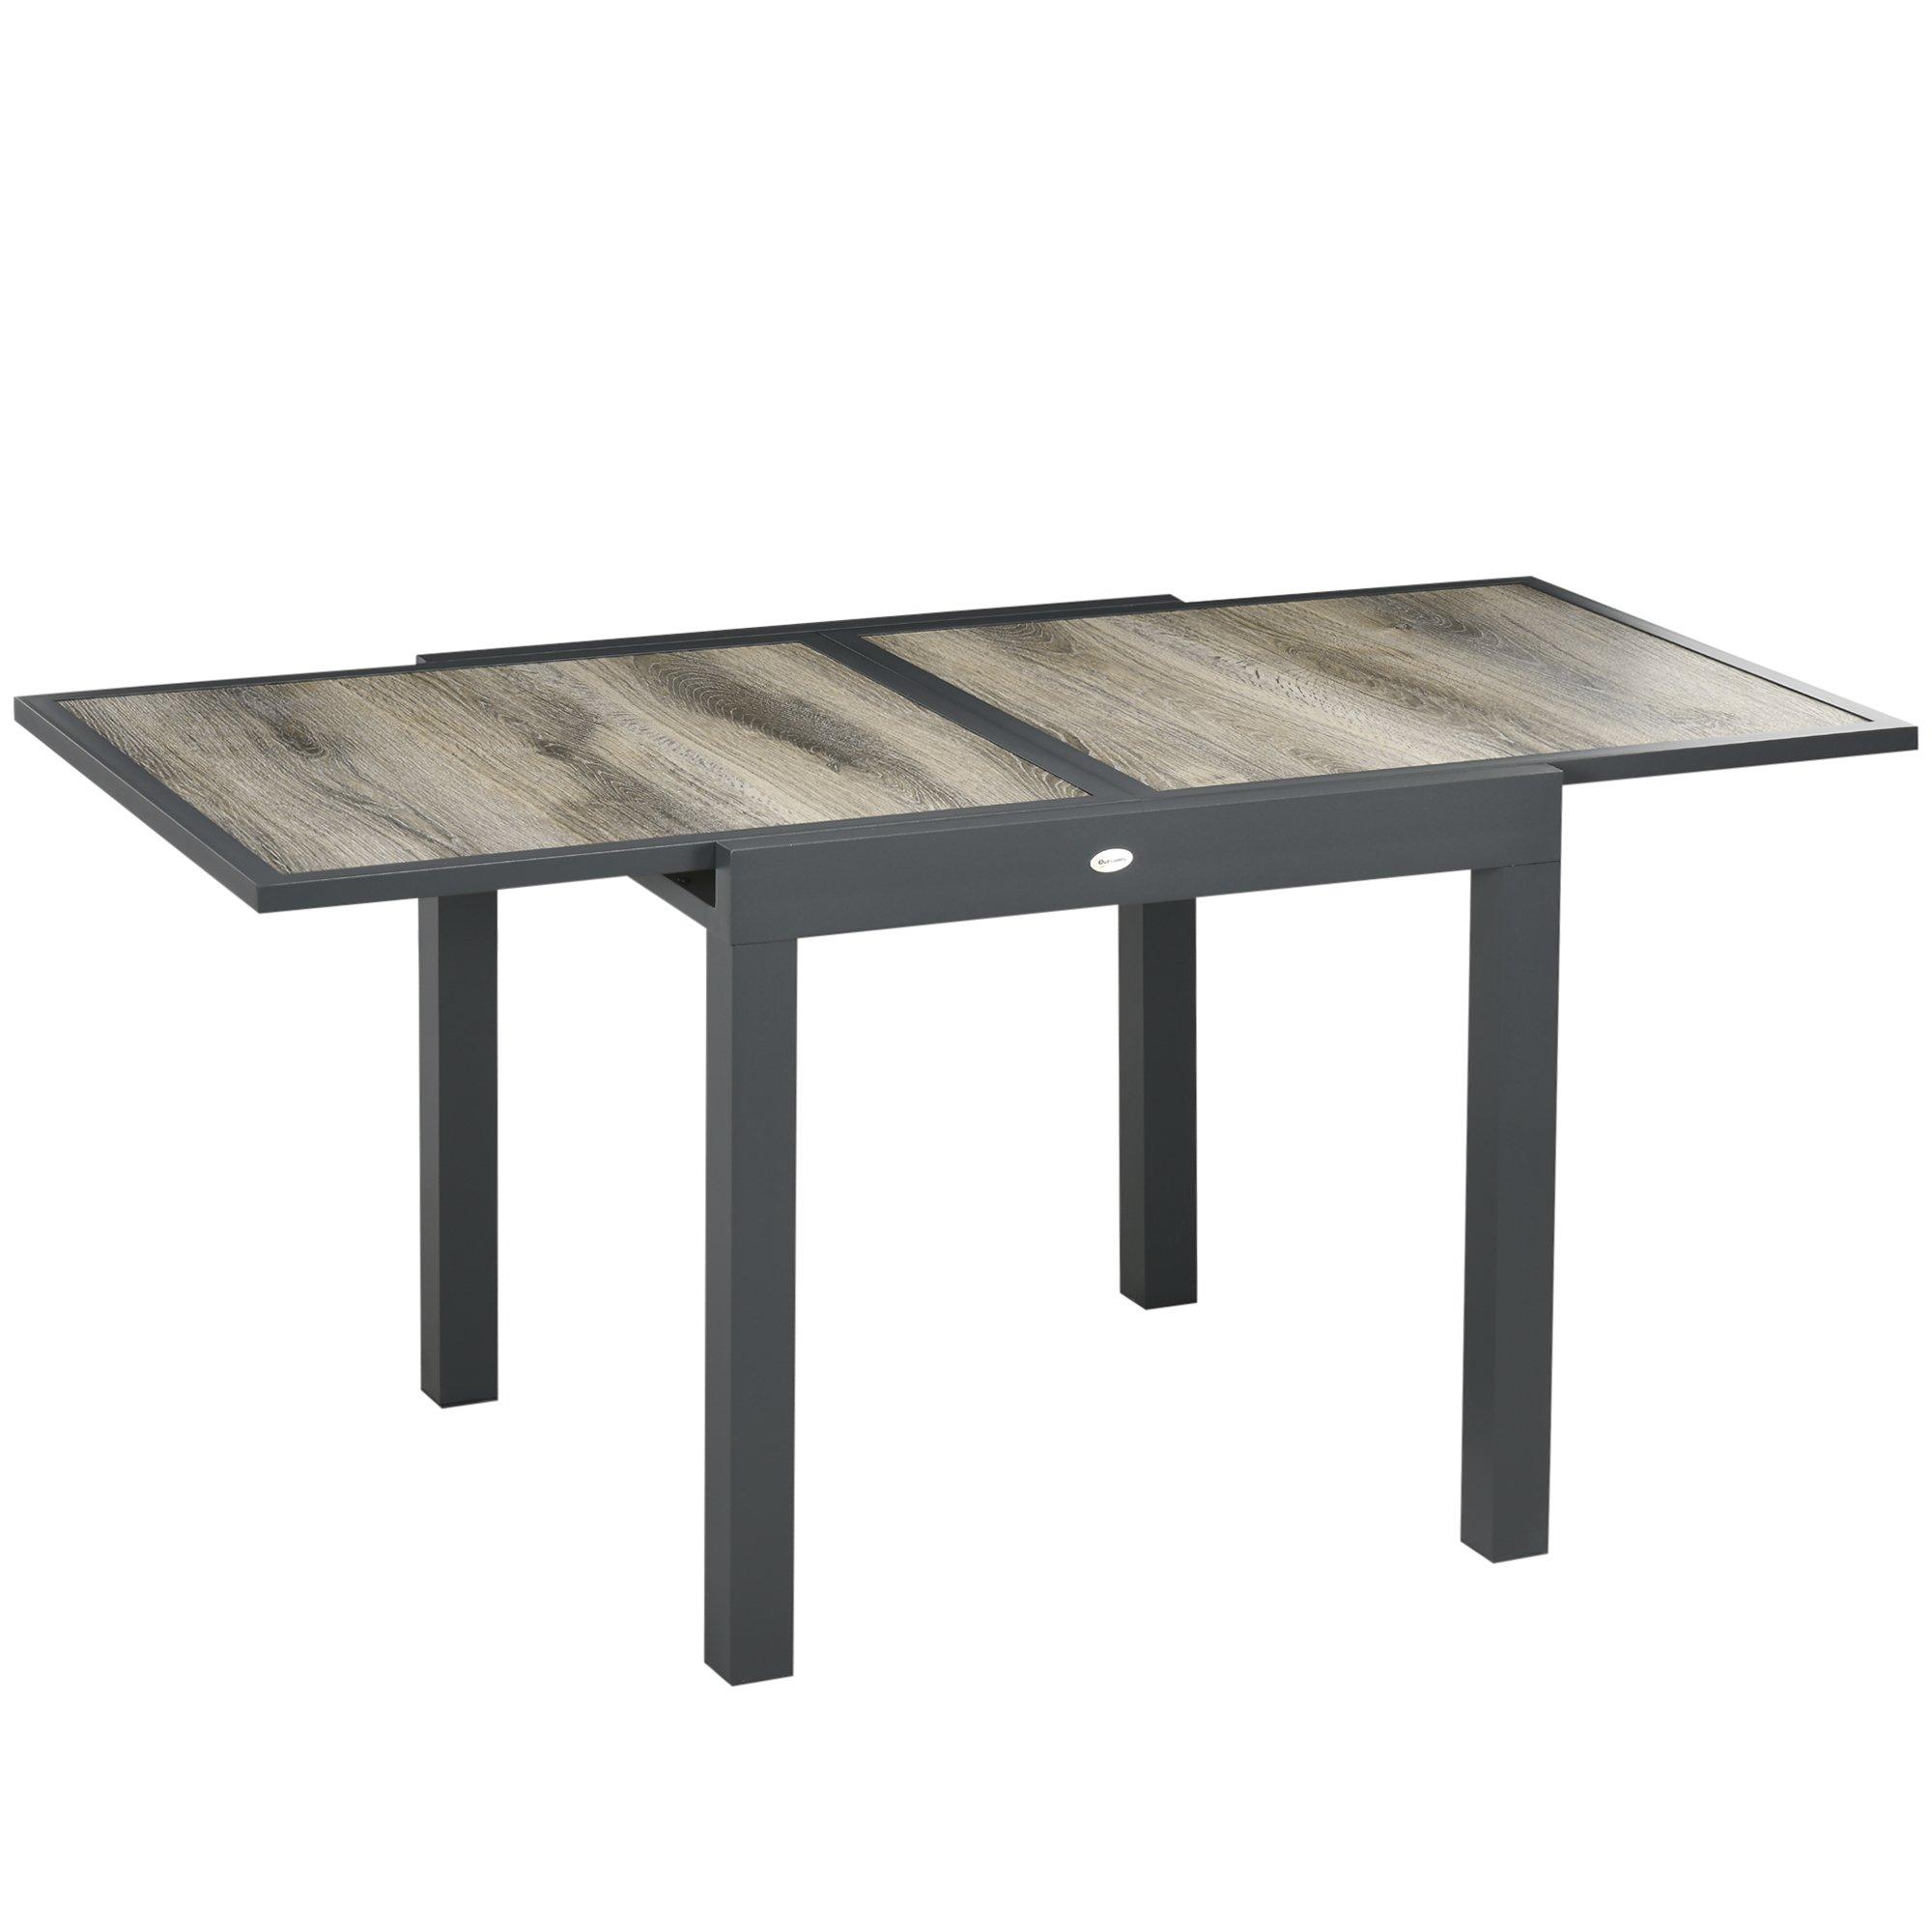 Extendable Outdoor Dining Table Aluminium Rectangle Patio Table